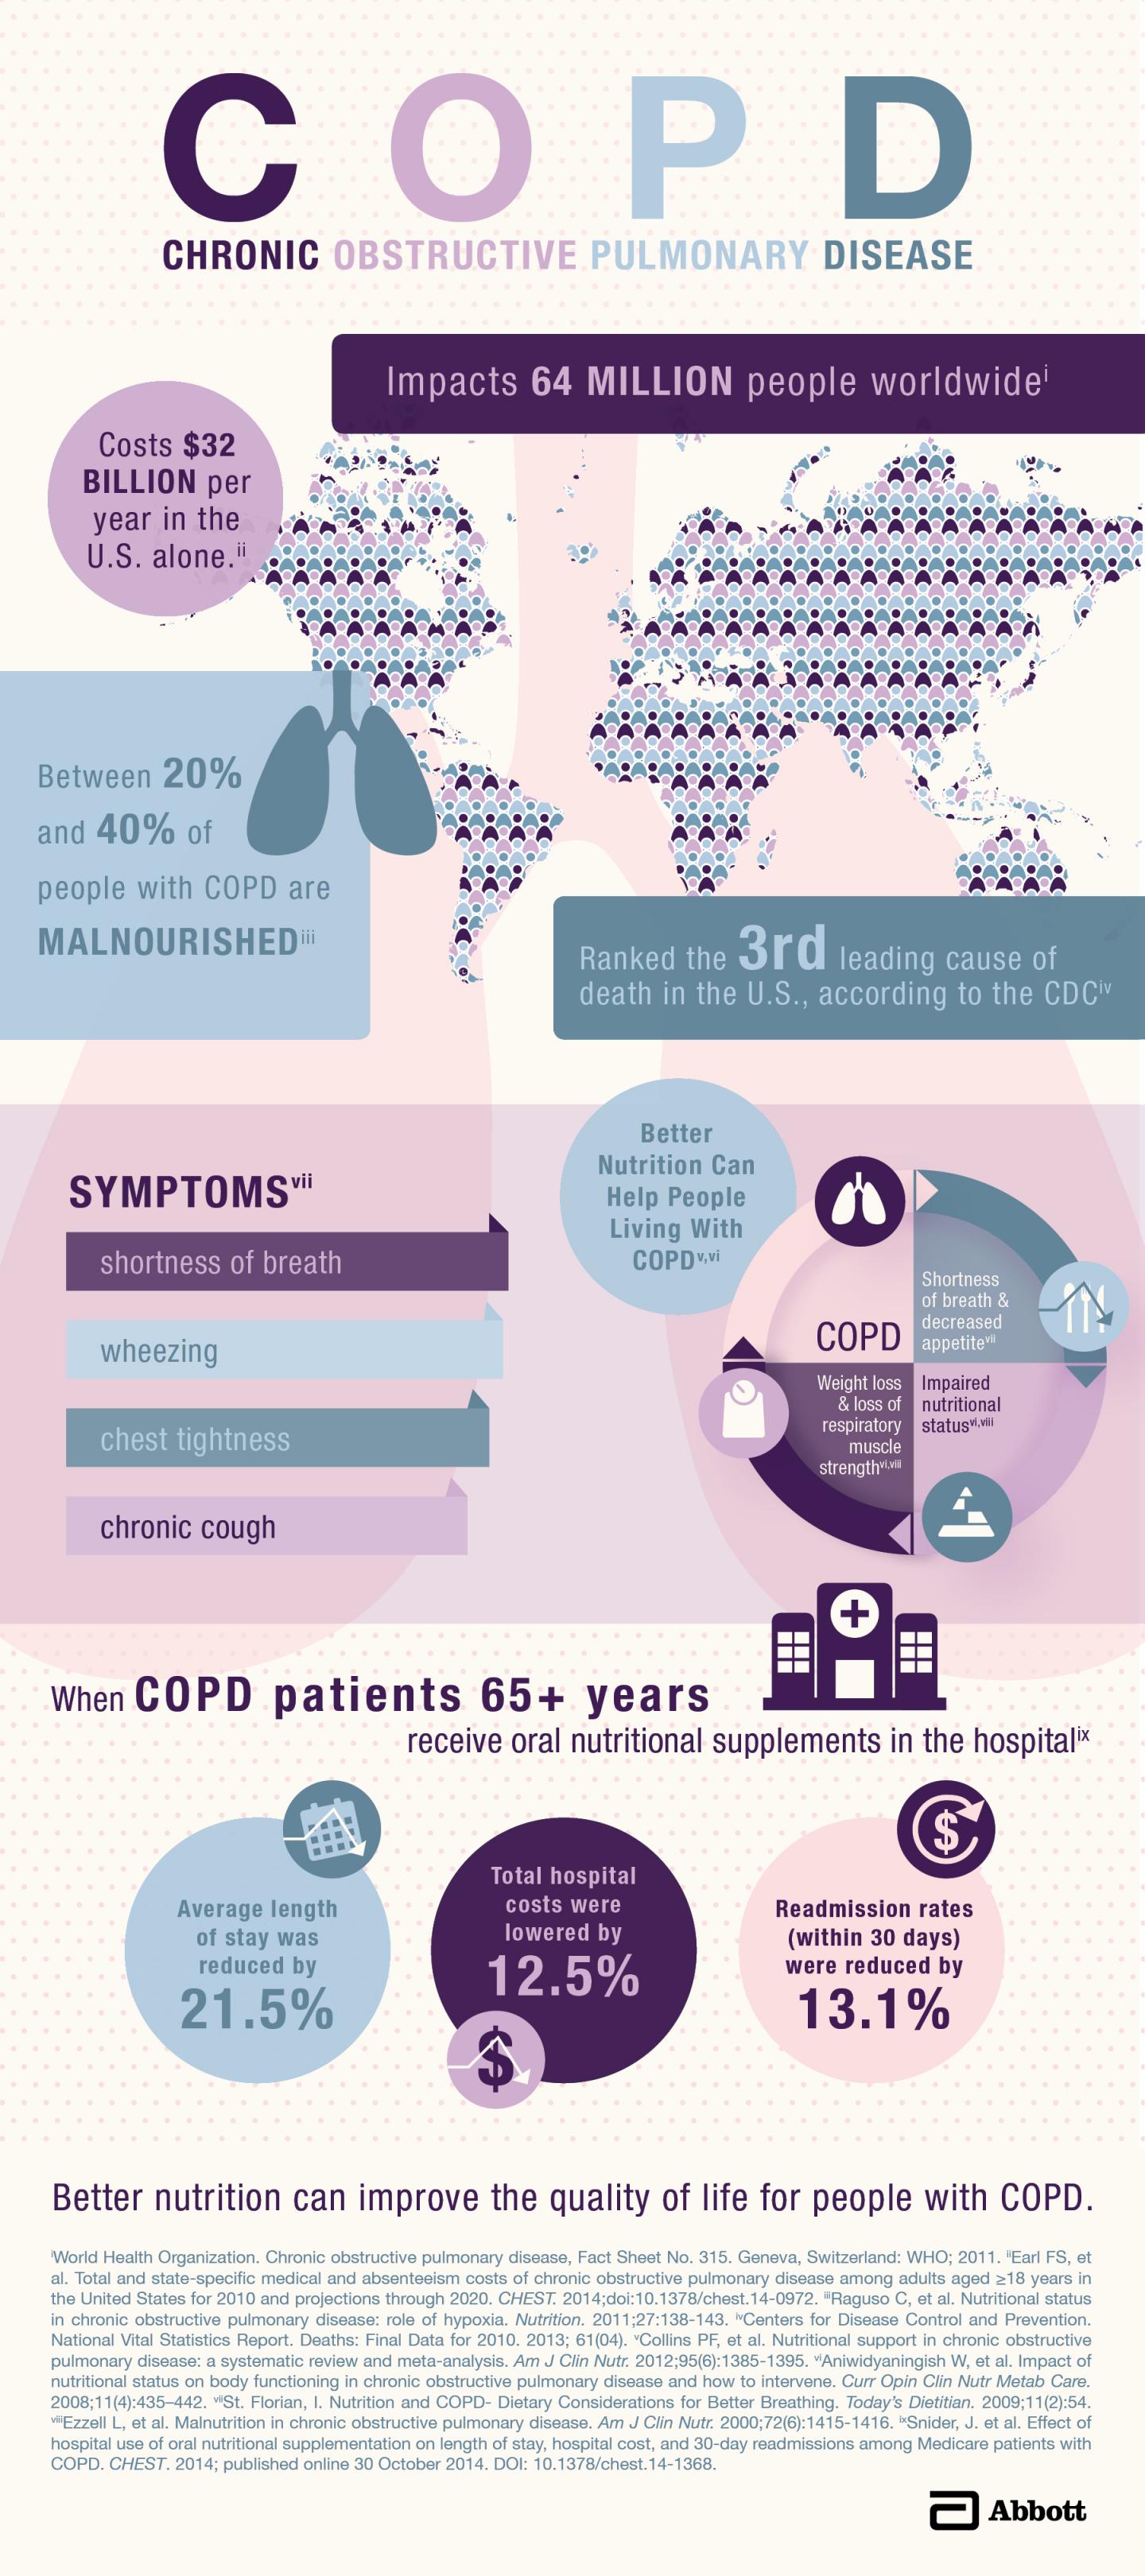 Impact of COPD